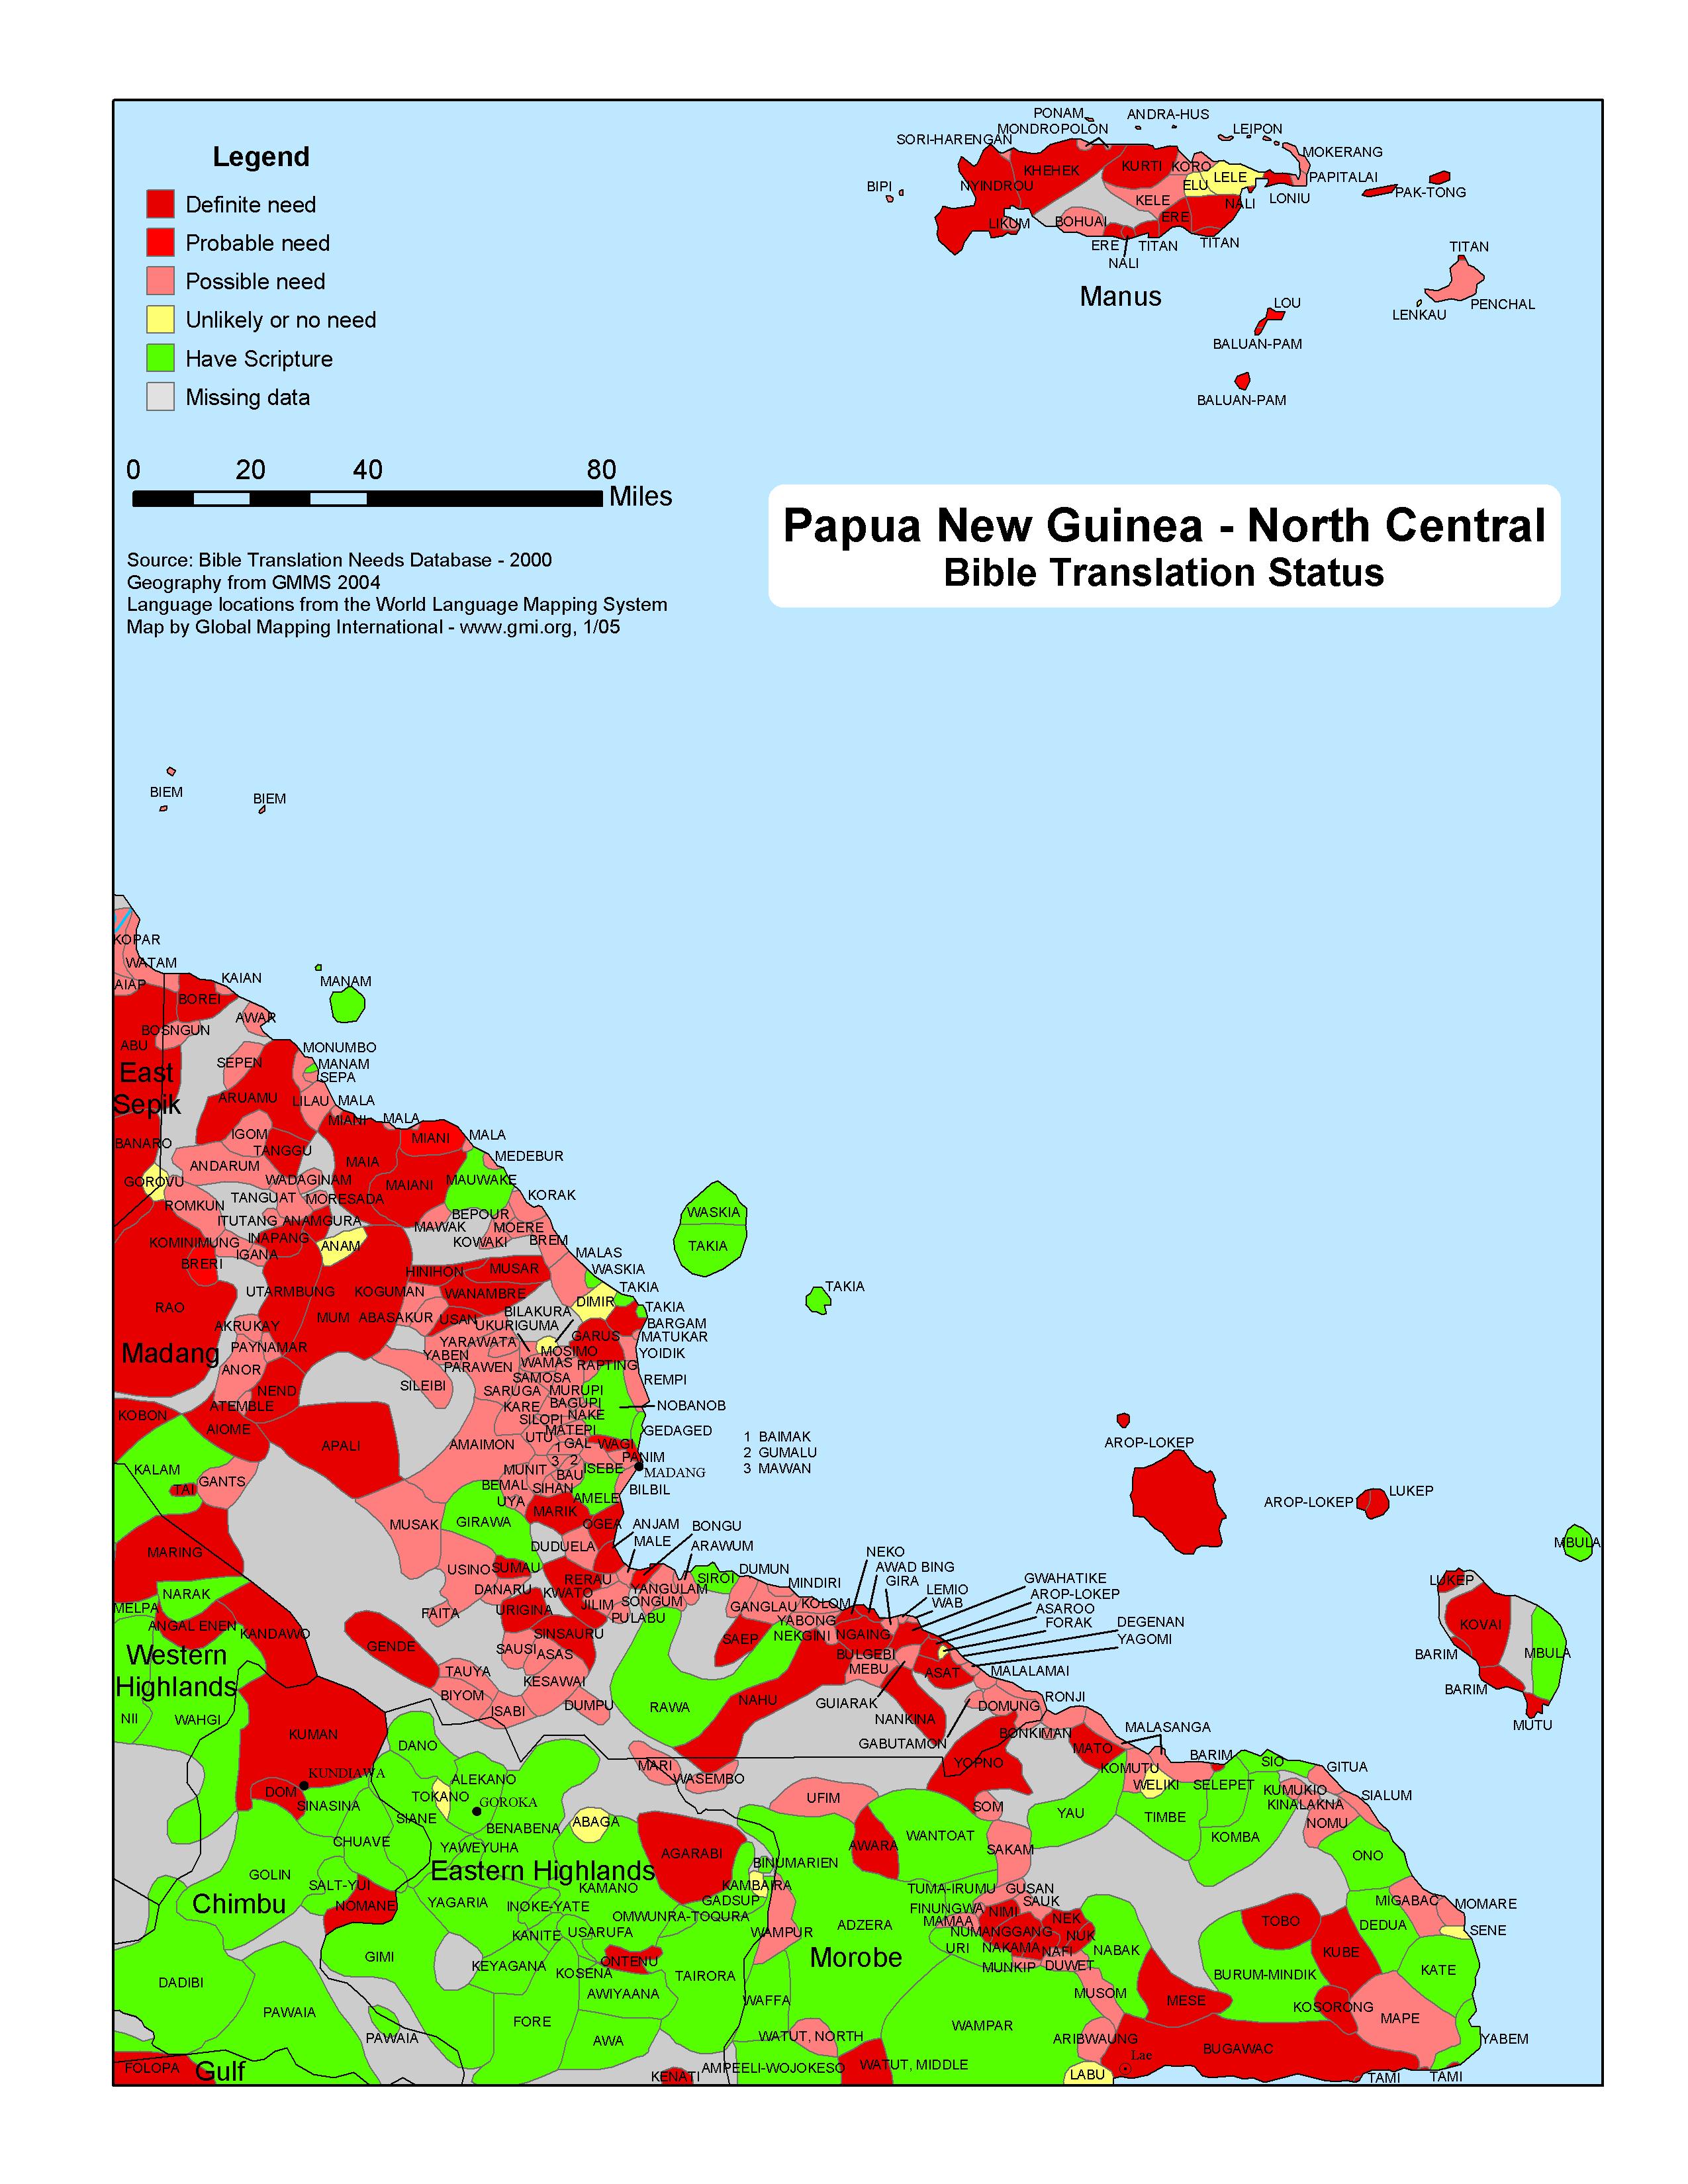 Papua New Guinea - North Central Bible Translation Status